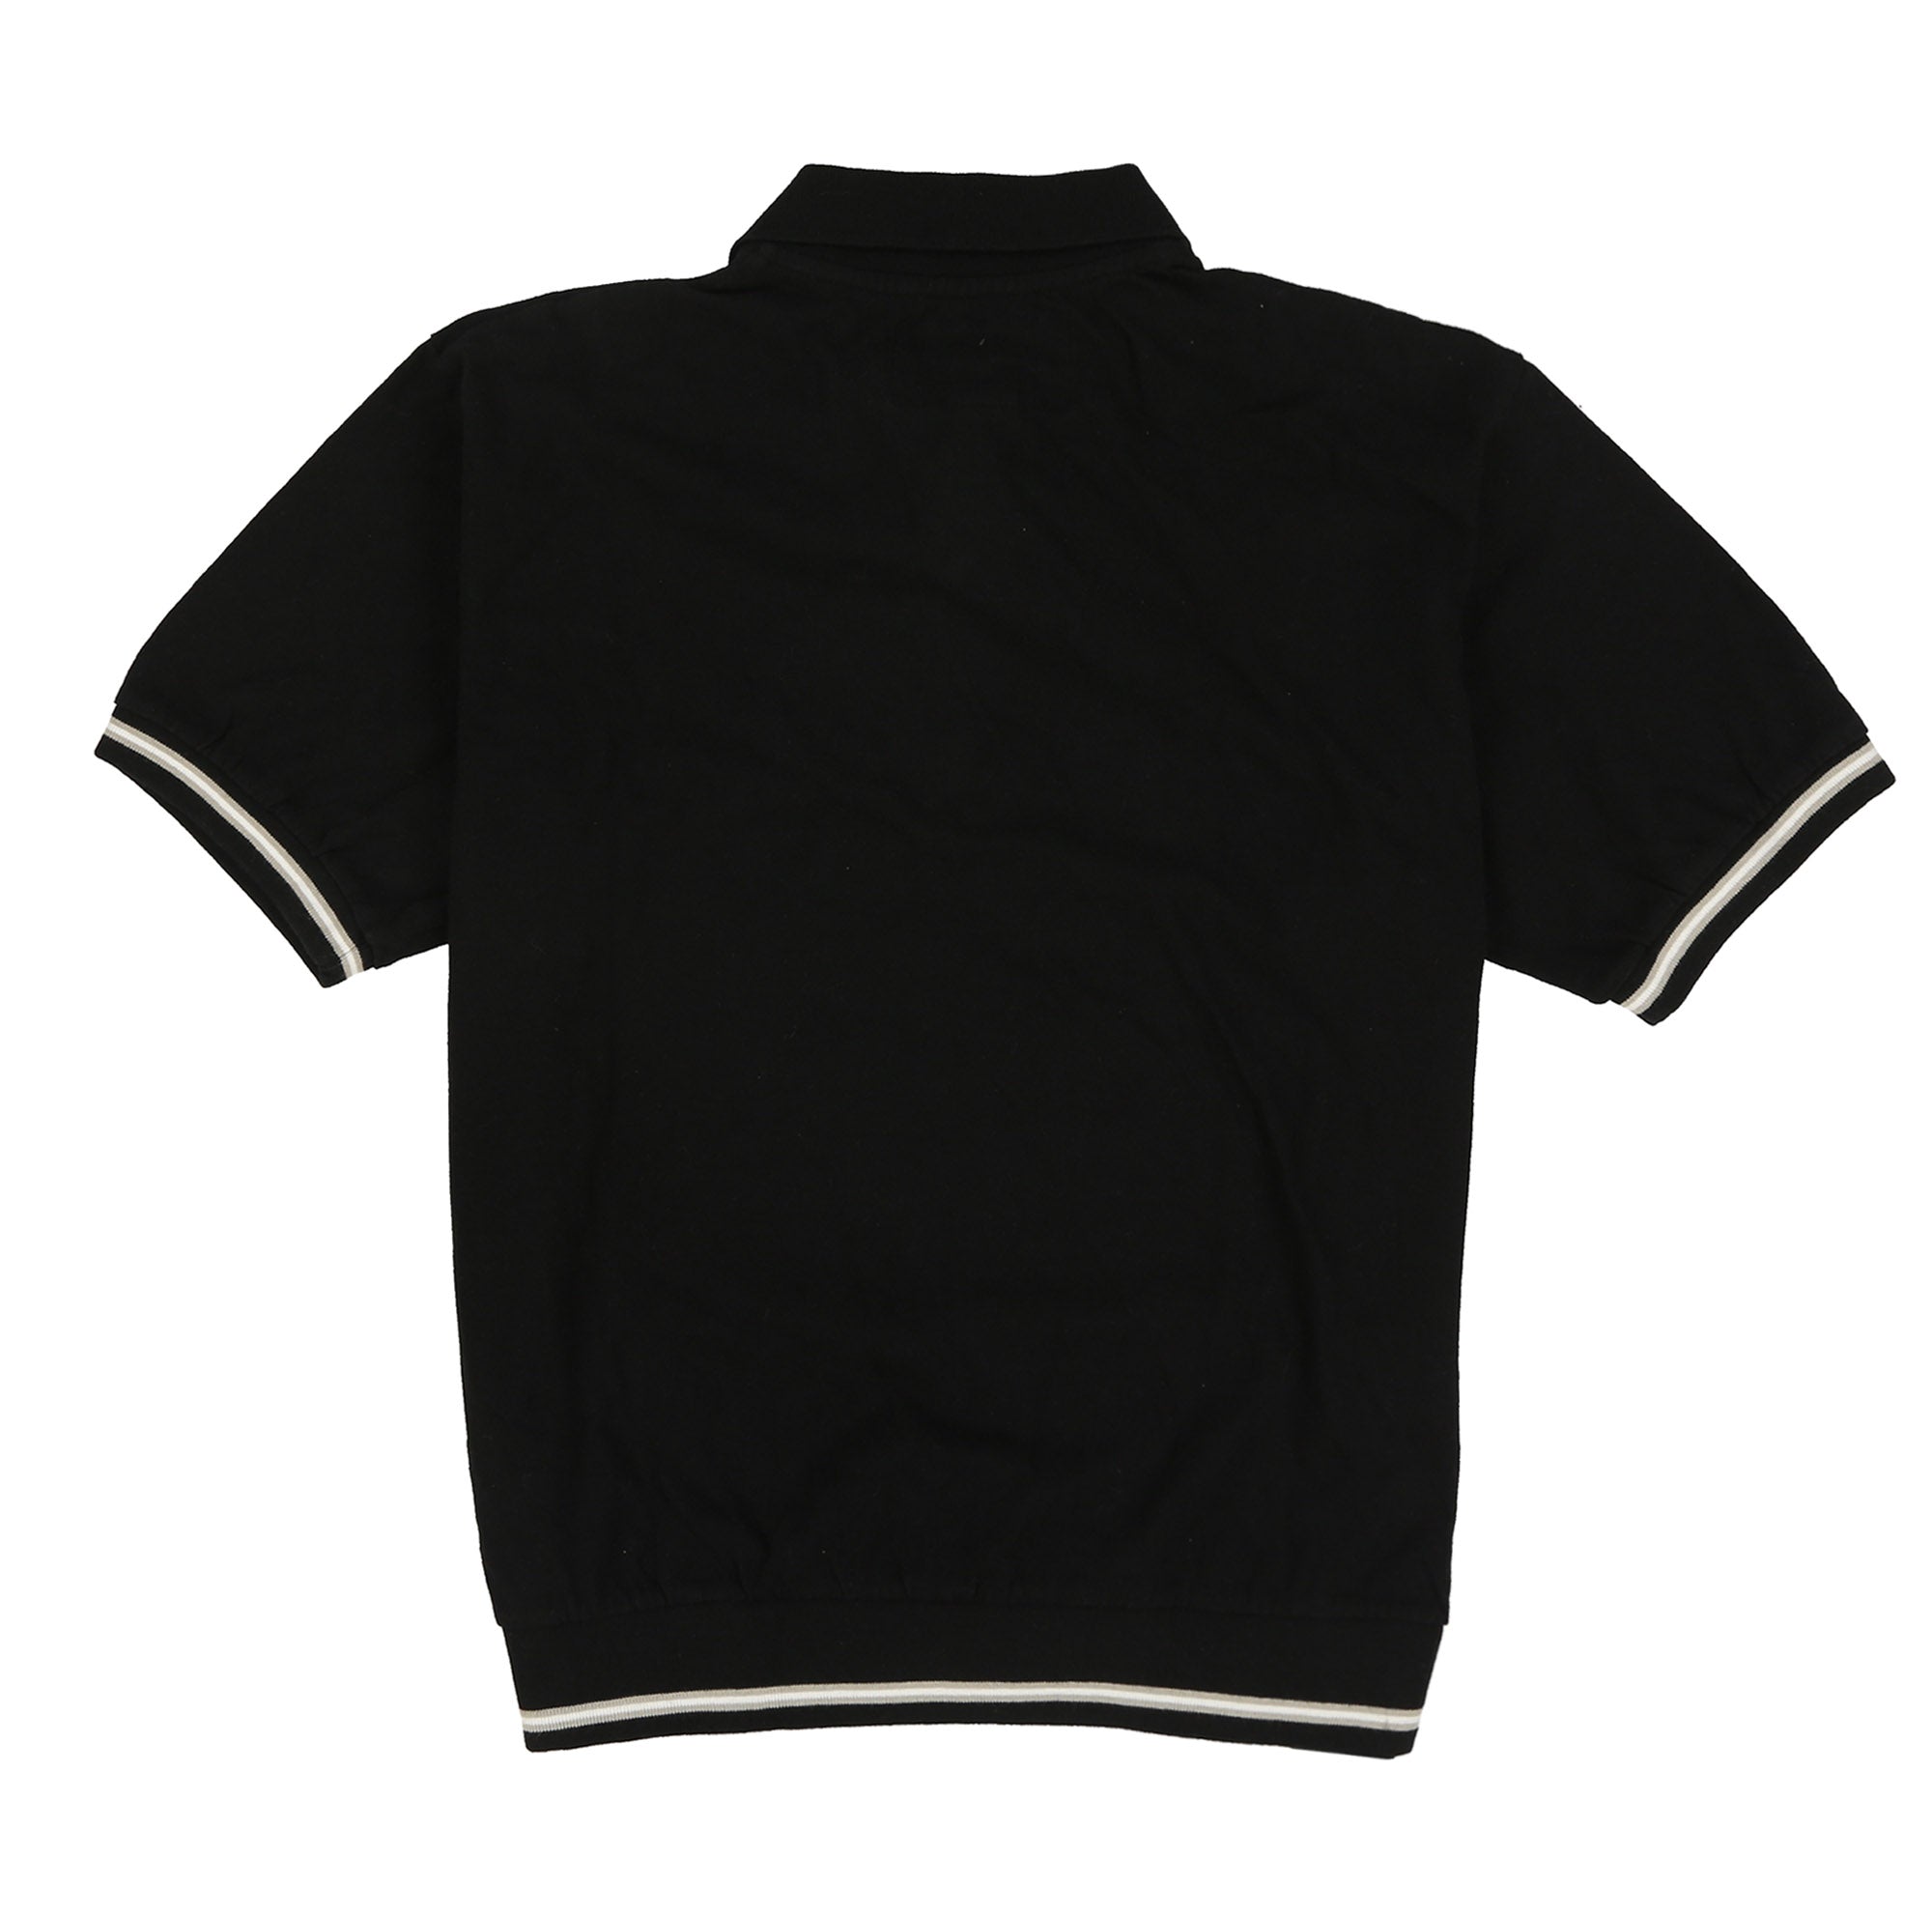 POLO SPORT 6B EMB SPELL OUT SS POLO // BLACK